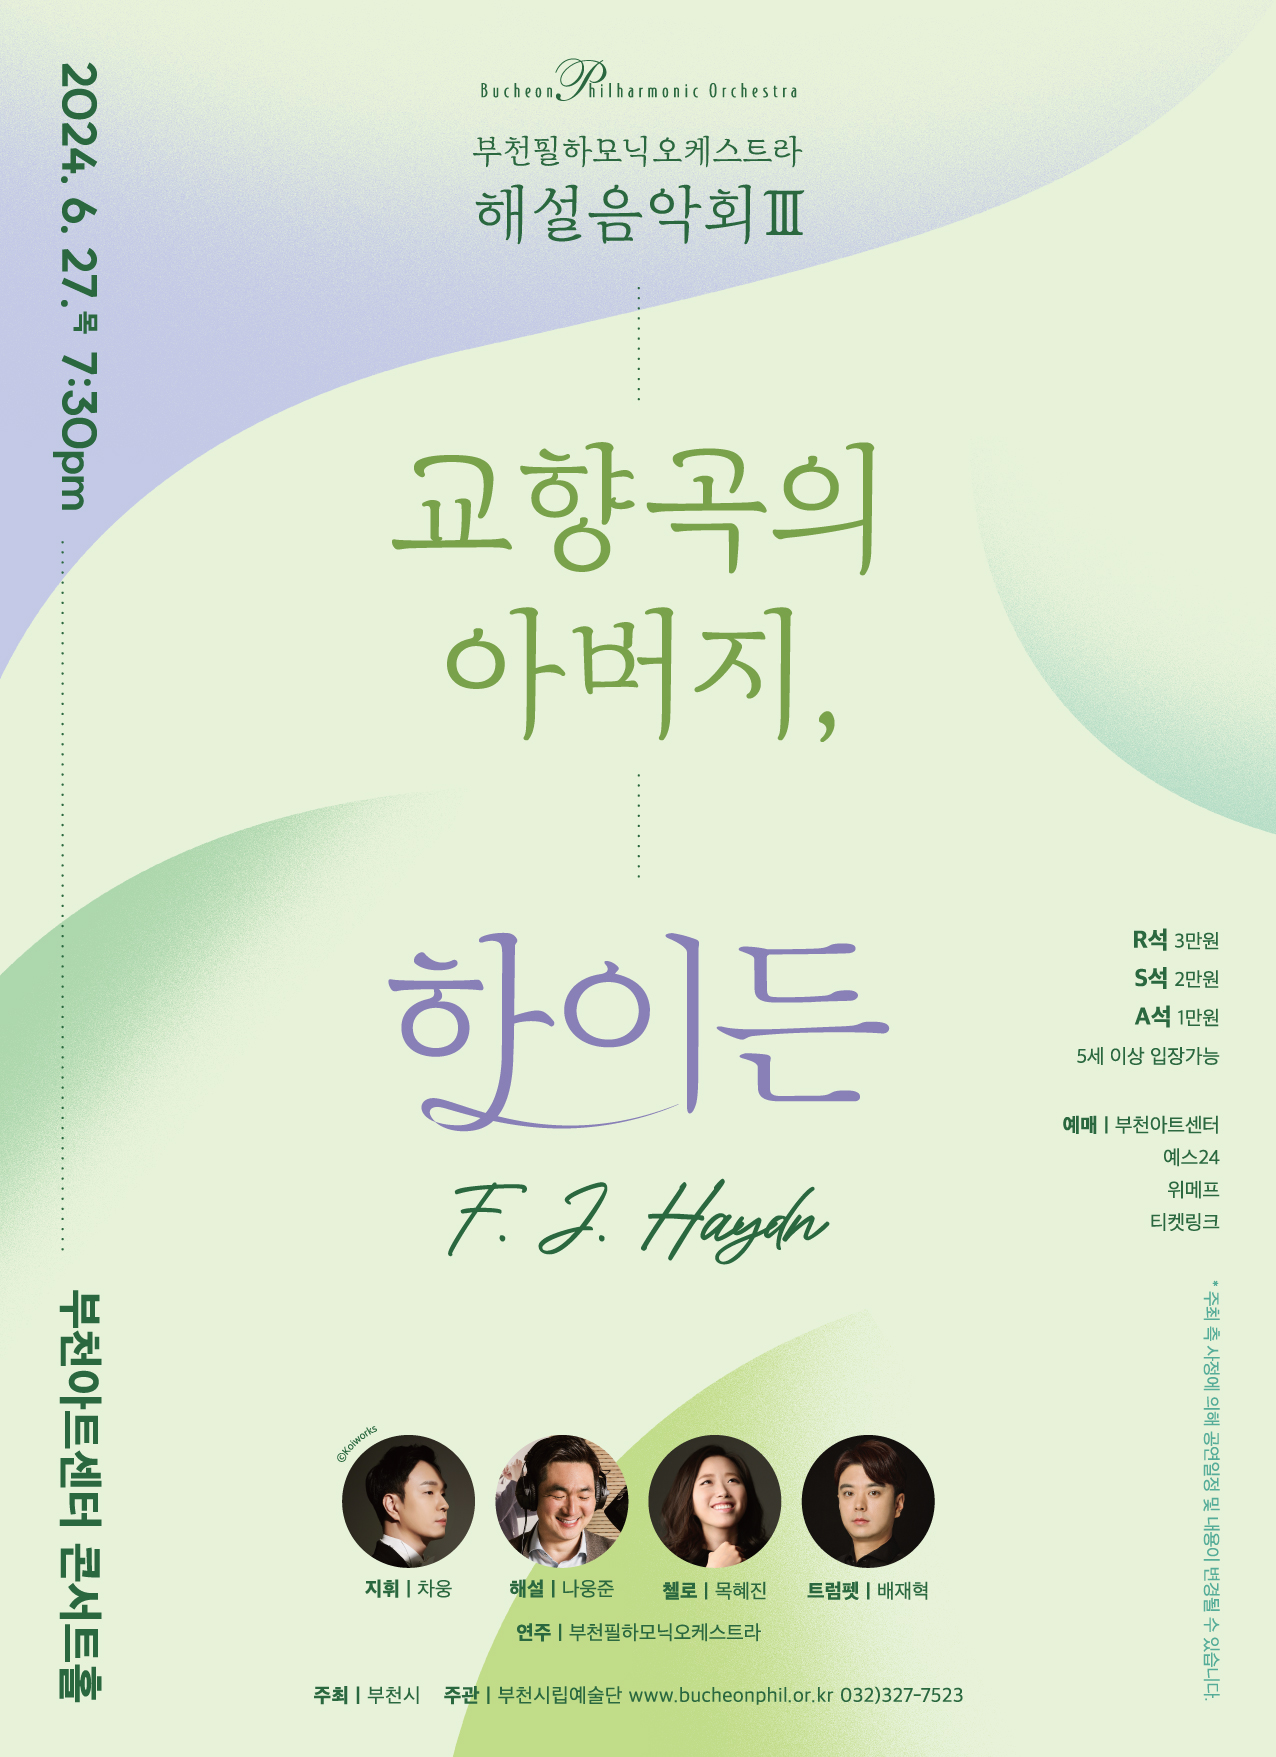 Bucheon Philharmonic Orchestra Lecture Concert 'Haydn'